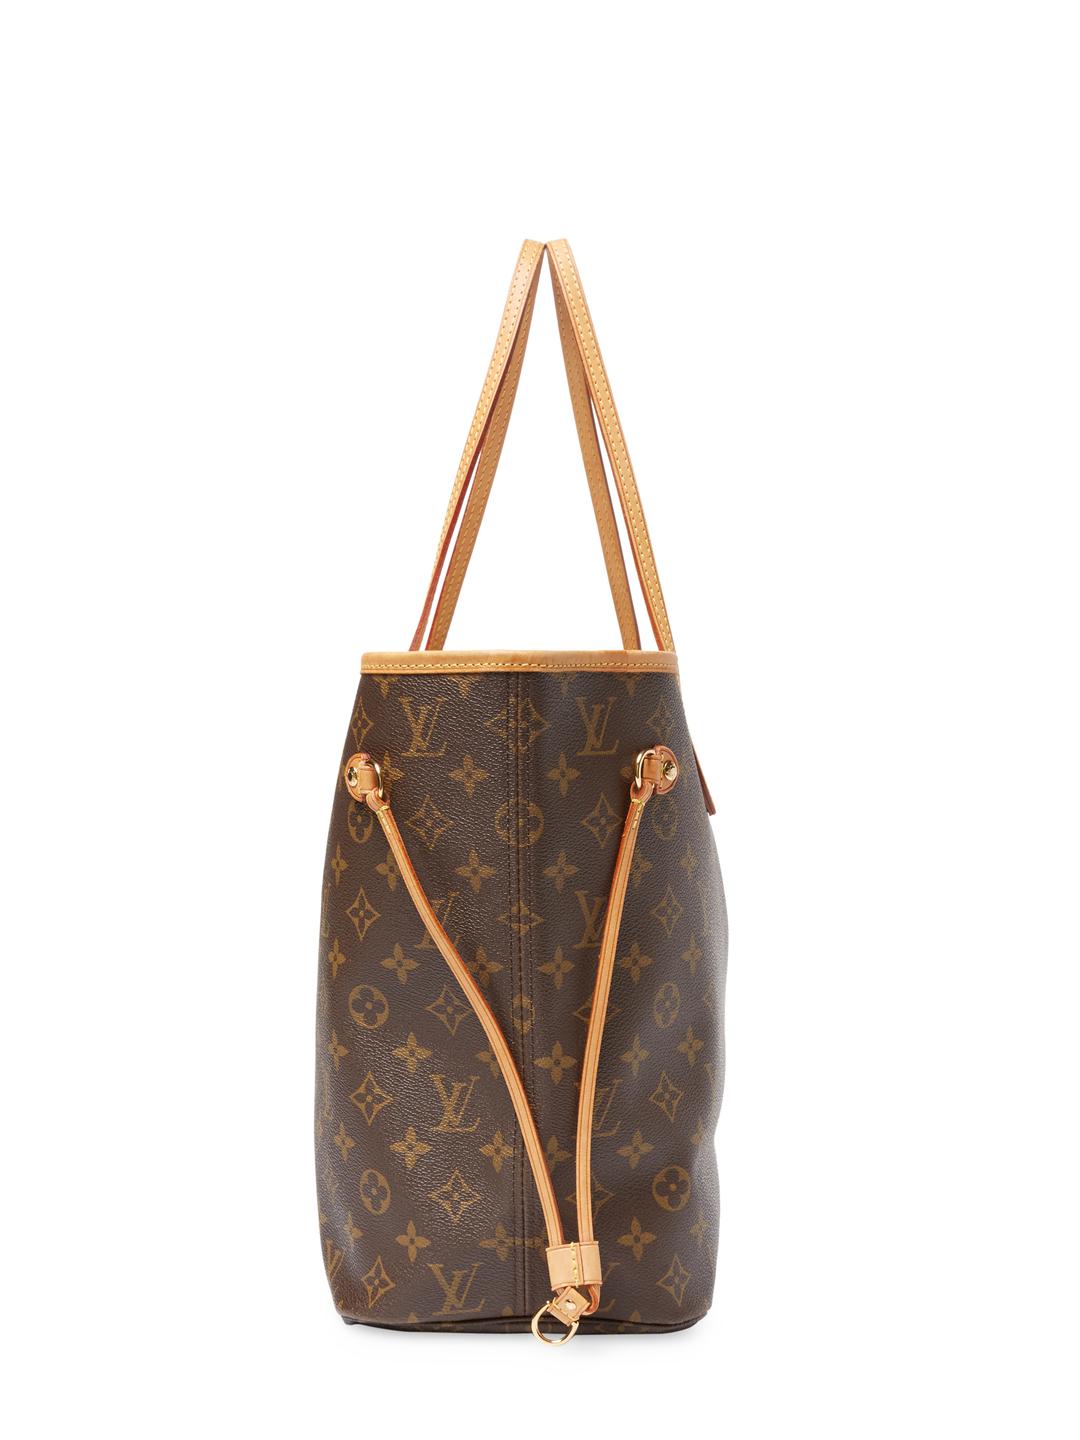 Louis Vuitton Neverfull Tote Bag in Brown - Lyst